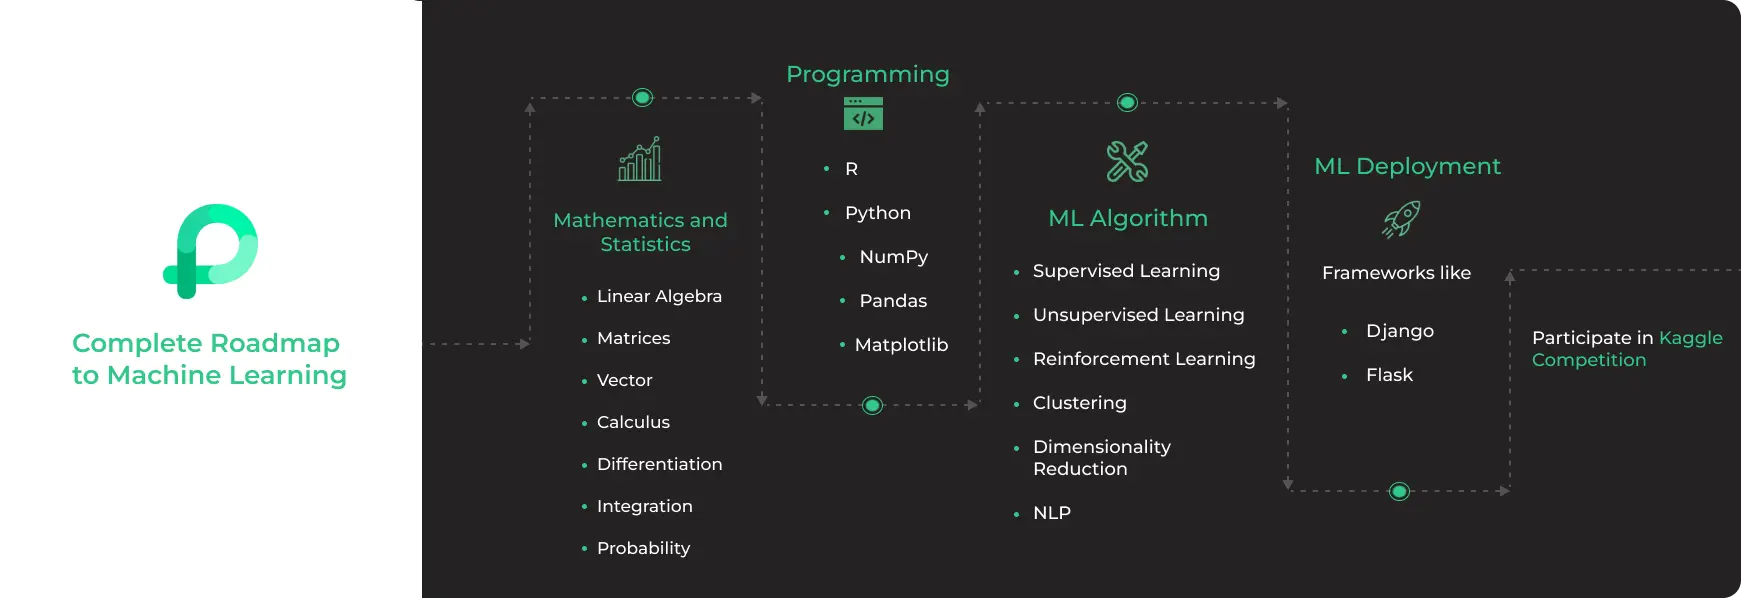 Complete Roadmap to Machine Learning